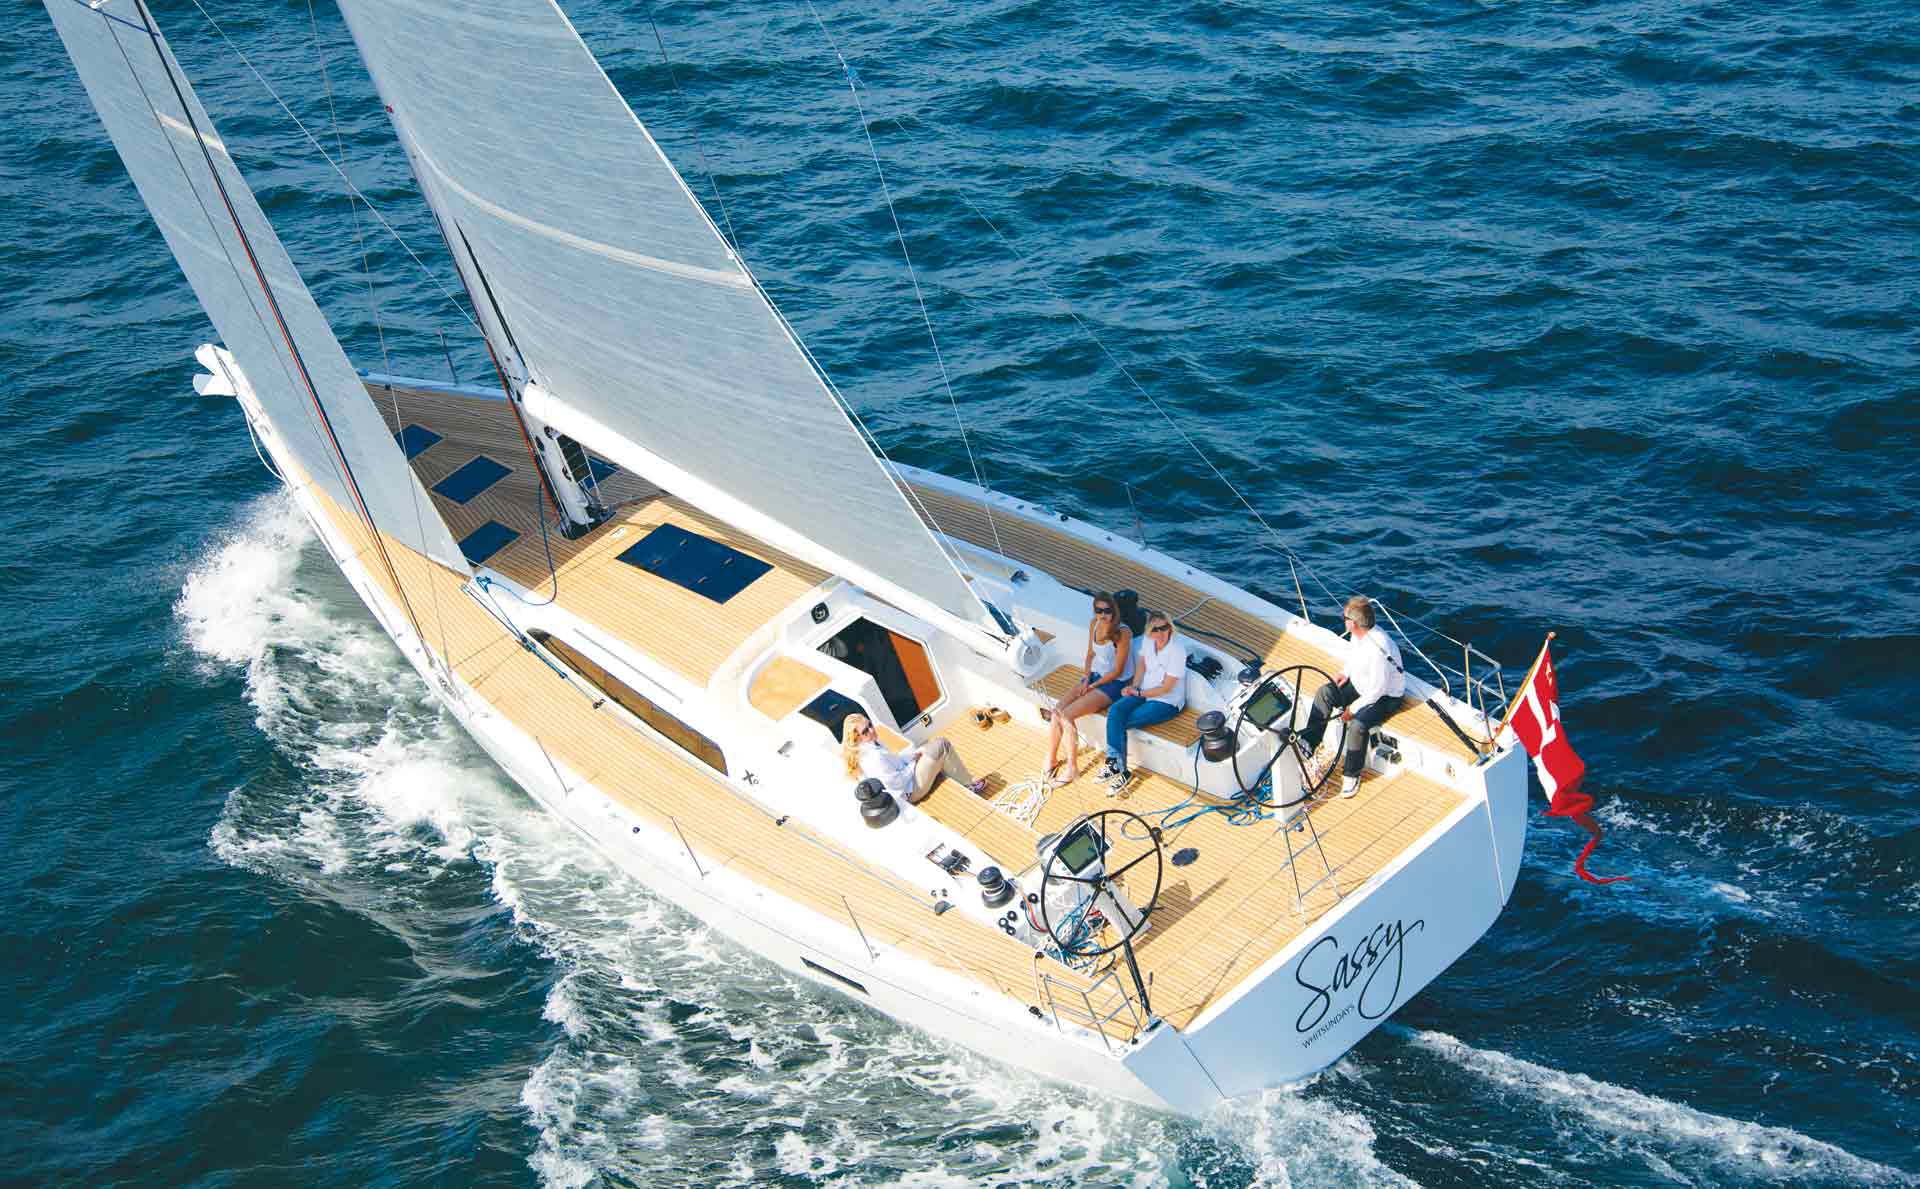 X-Yachts are known for a fast yet pleasant cruising performance.